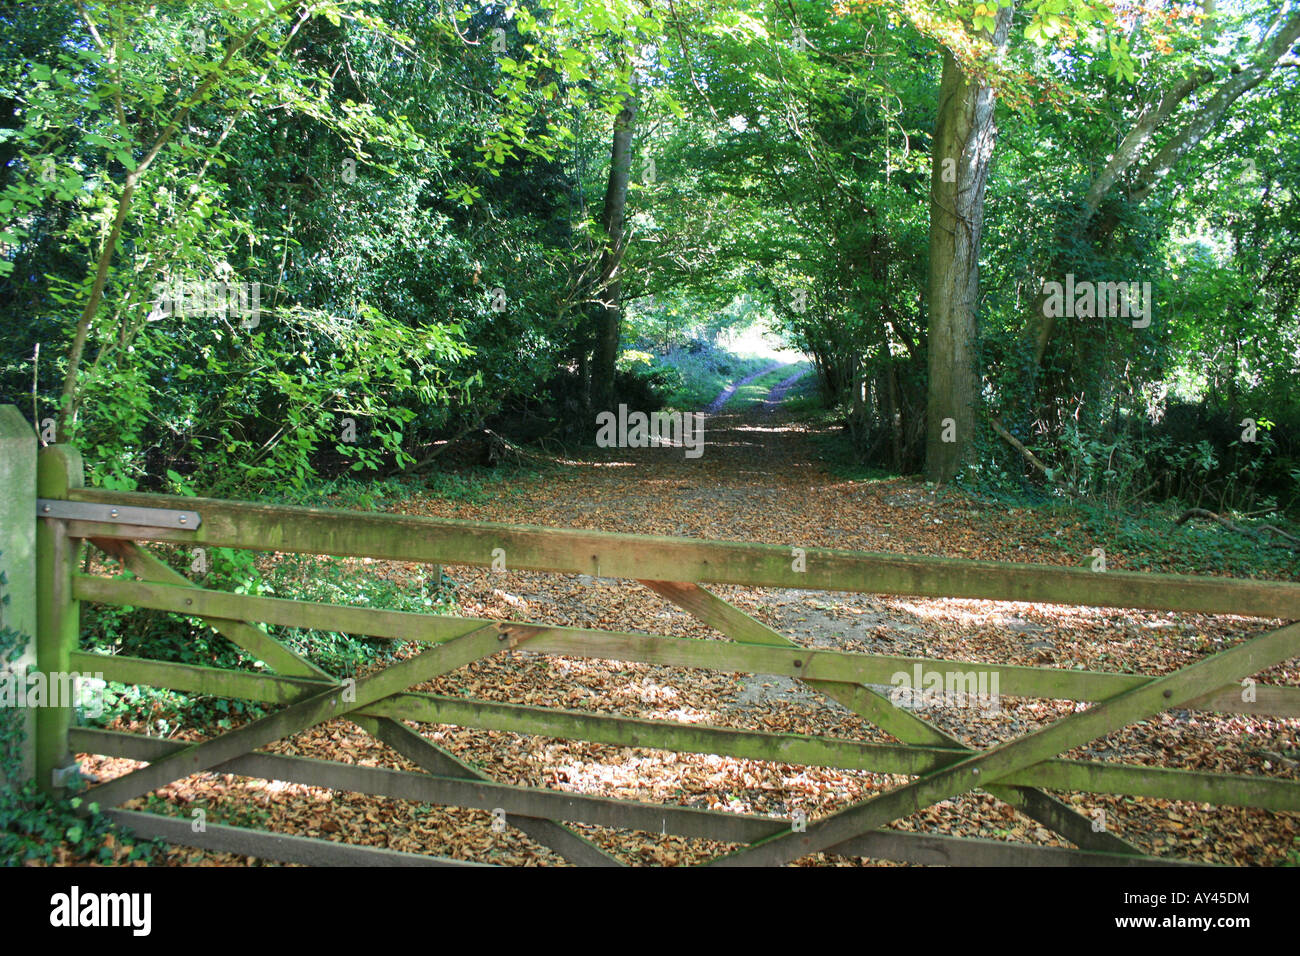 A wooden gate leading into the woods,with a field beyond,in autumn. There are autumn leaves on the ground. Stock Photo